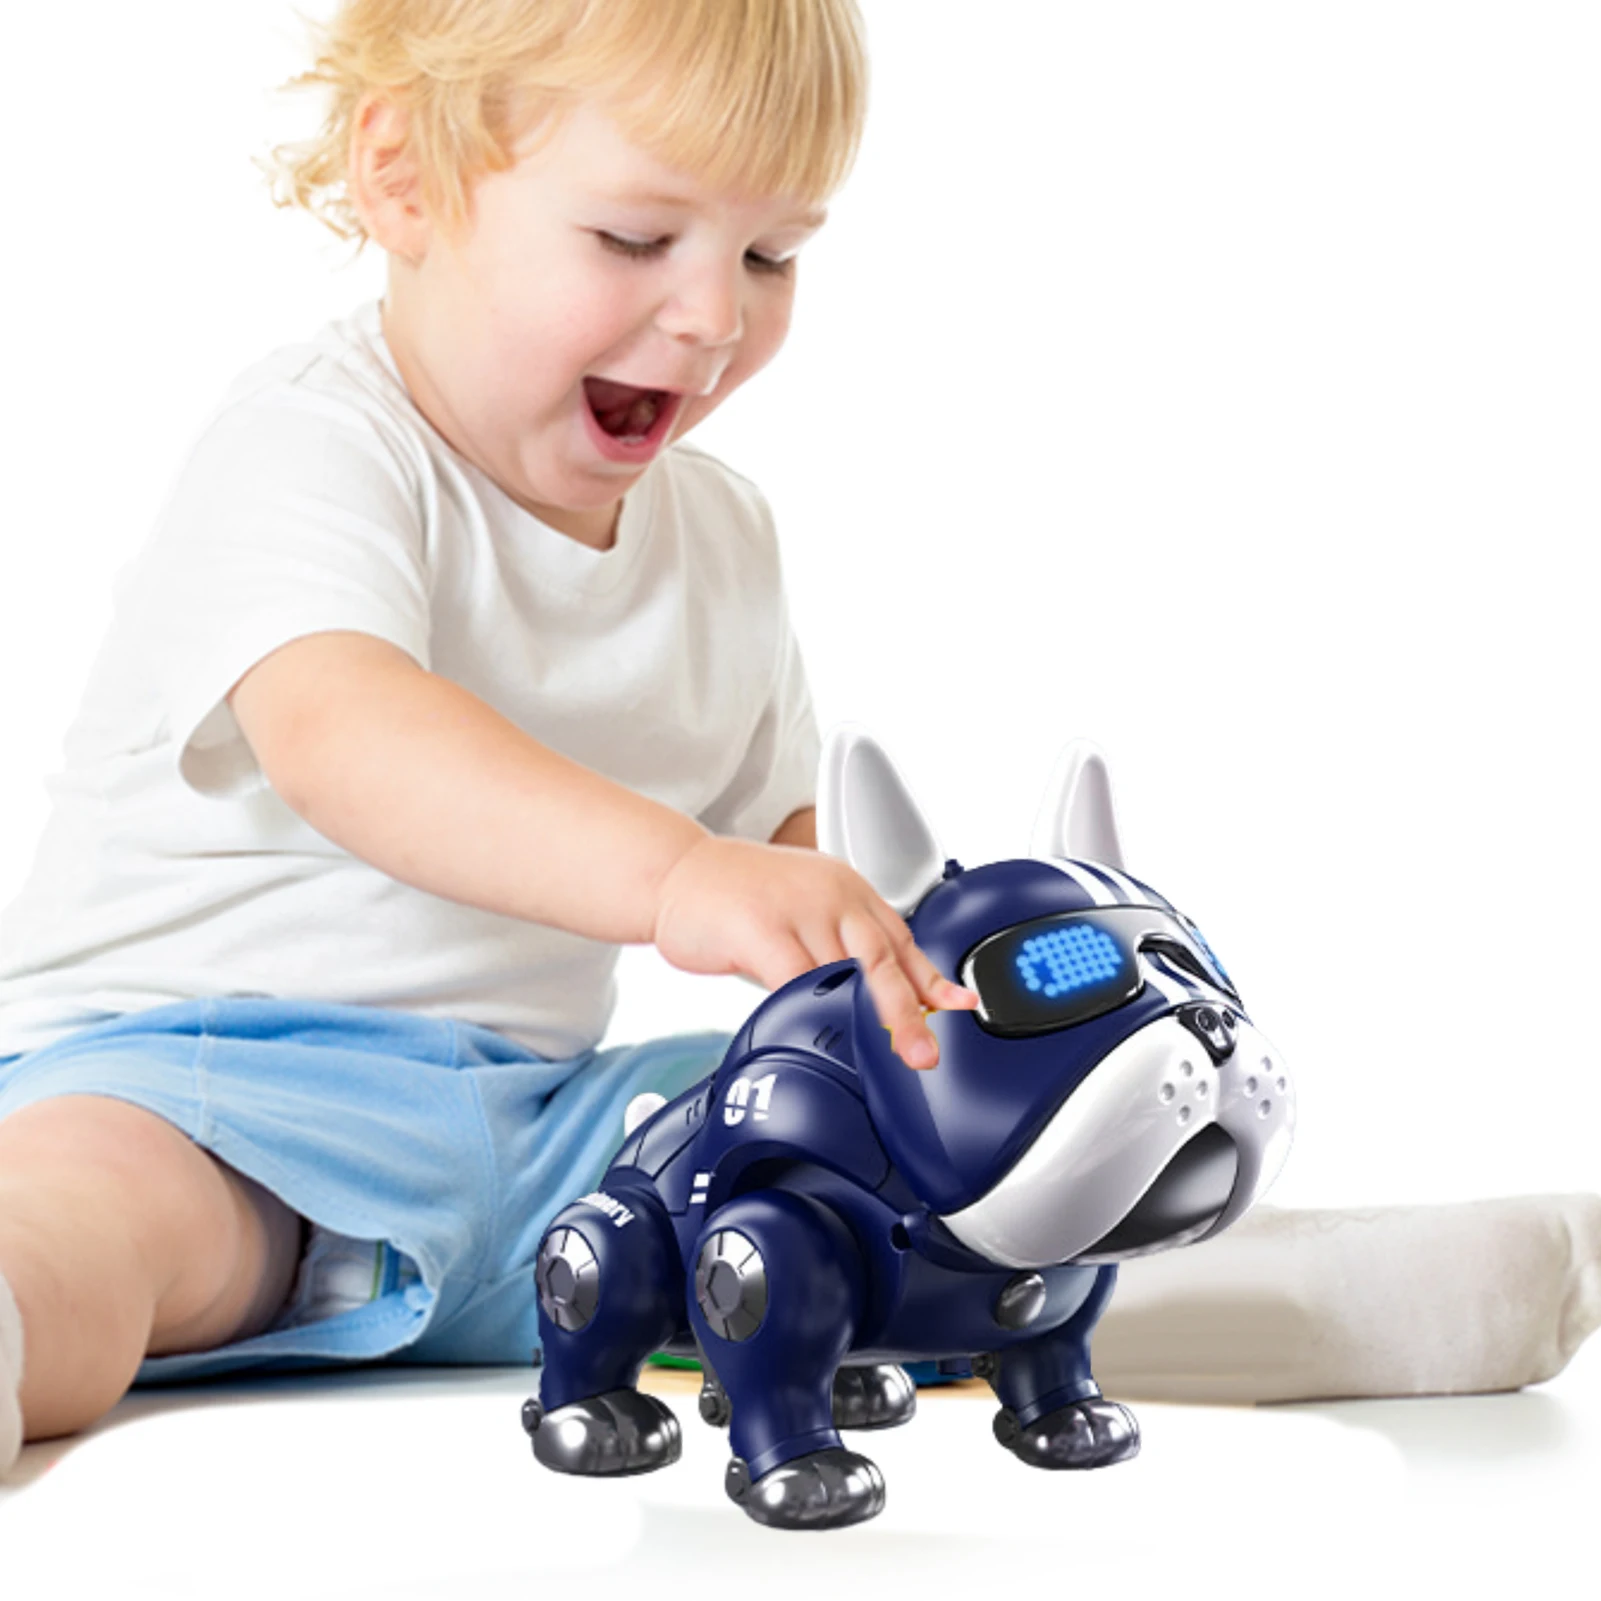 

Robot Dog Toy Toy Dogs That Walk And Dance Free Moveable Electronic Pets Dancing Robot For Kids Boys And Girls Adults Tabletop